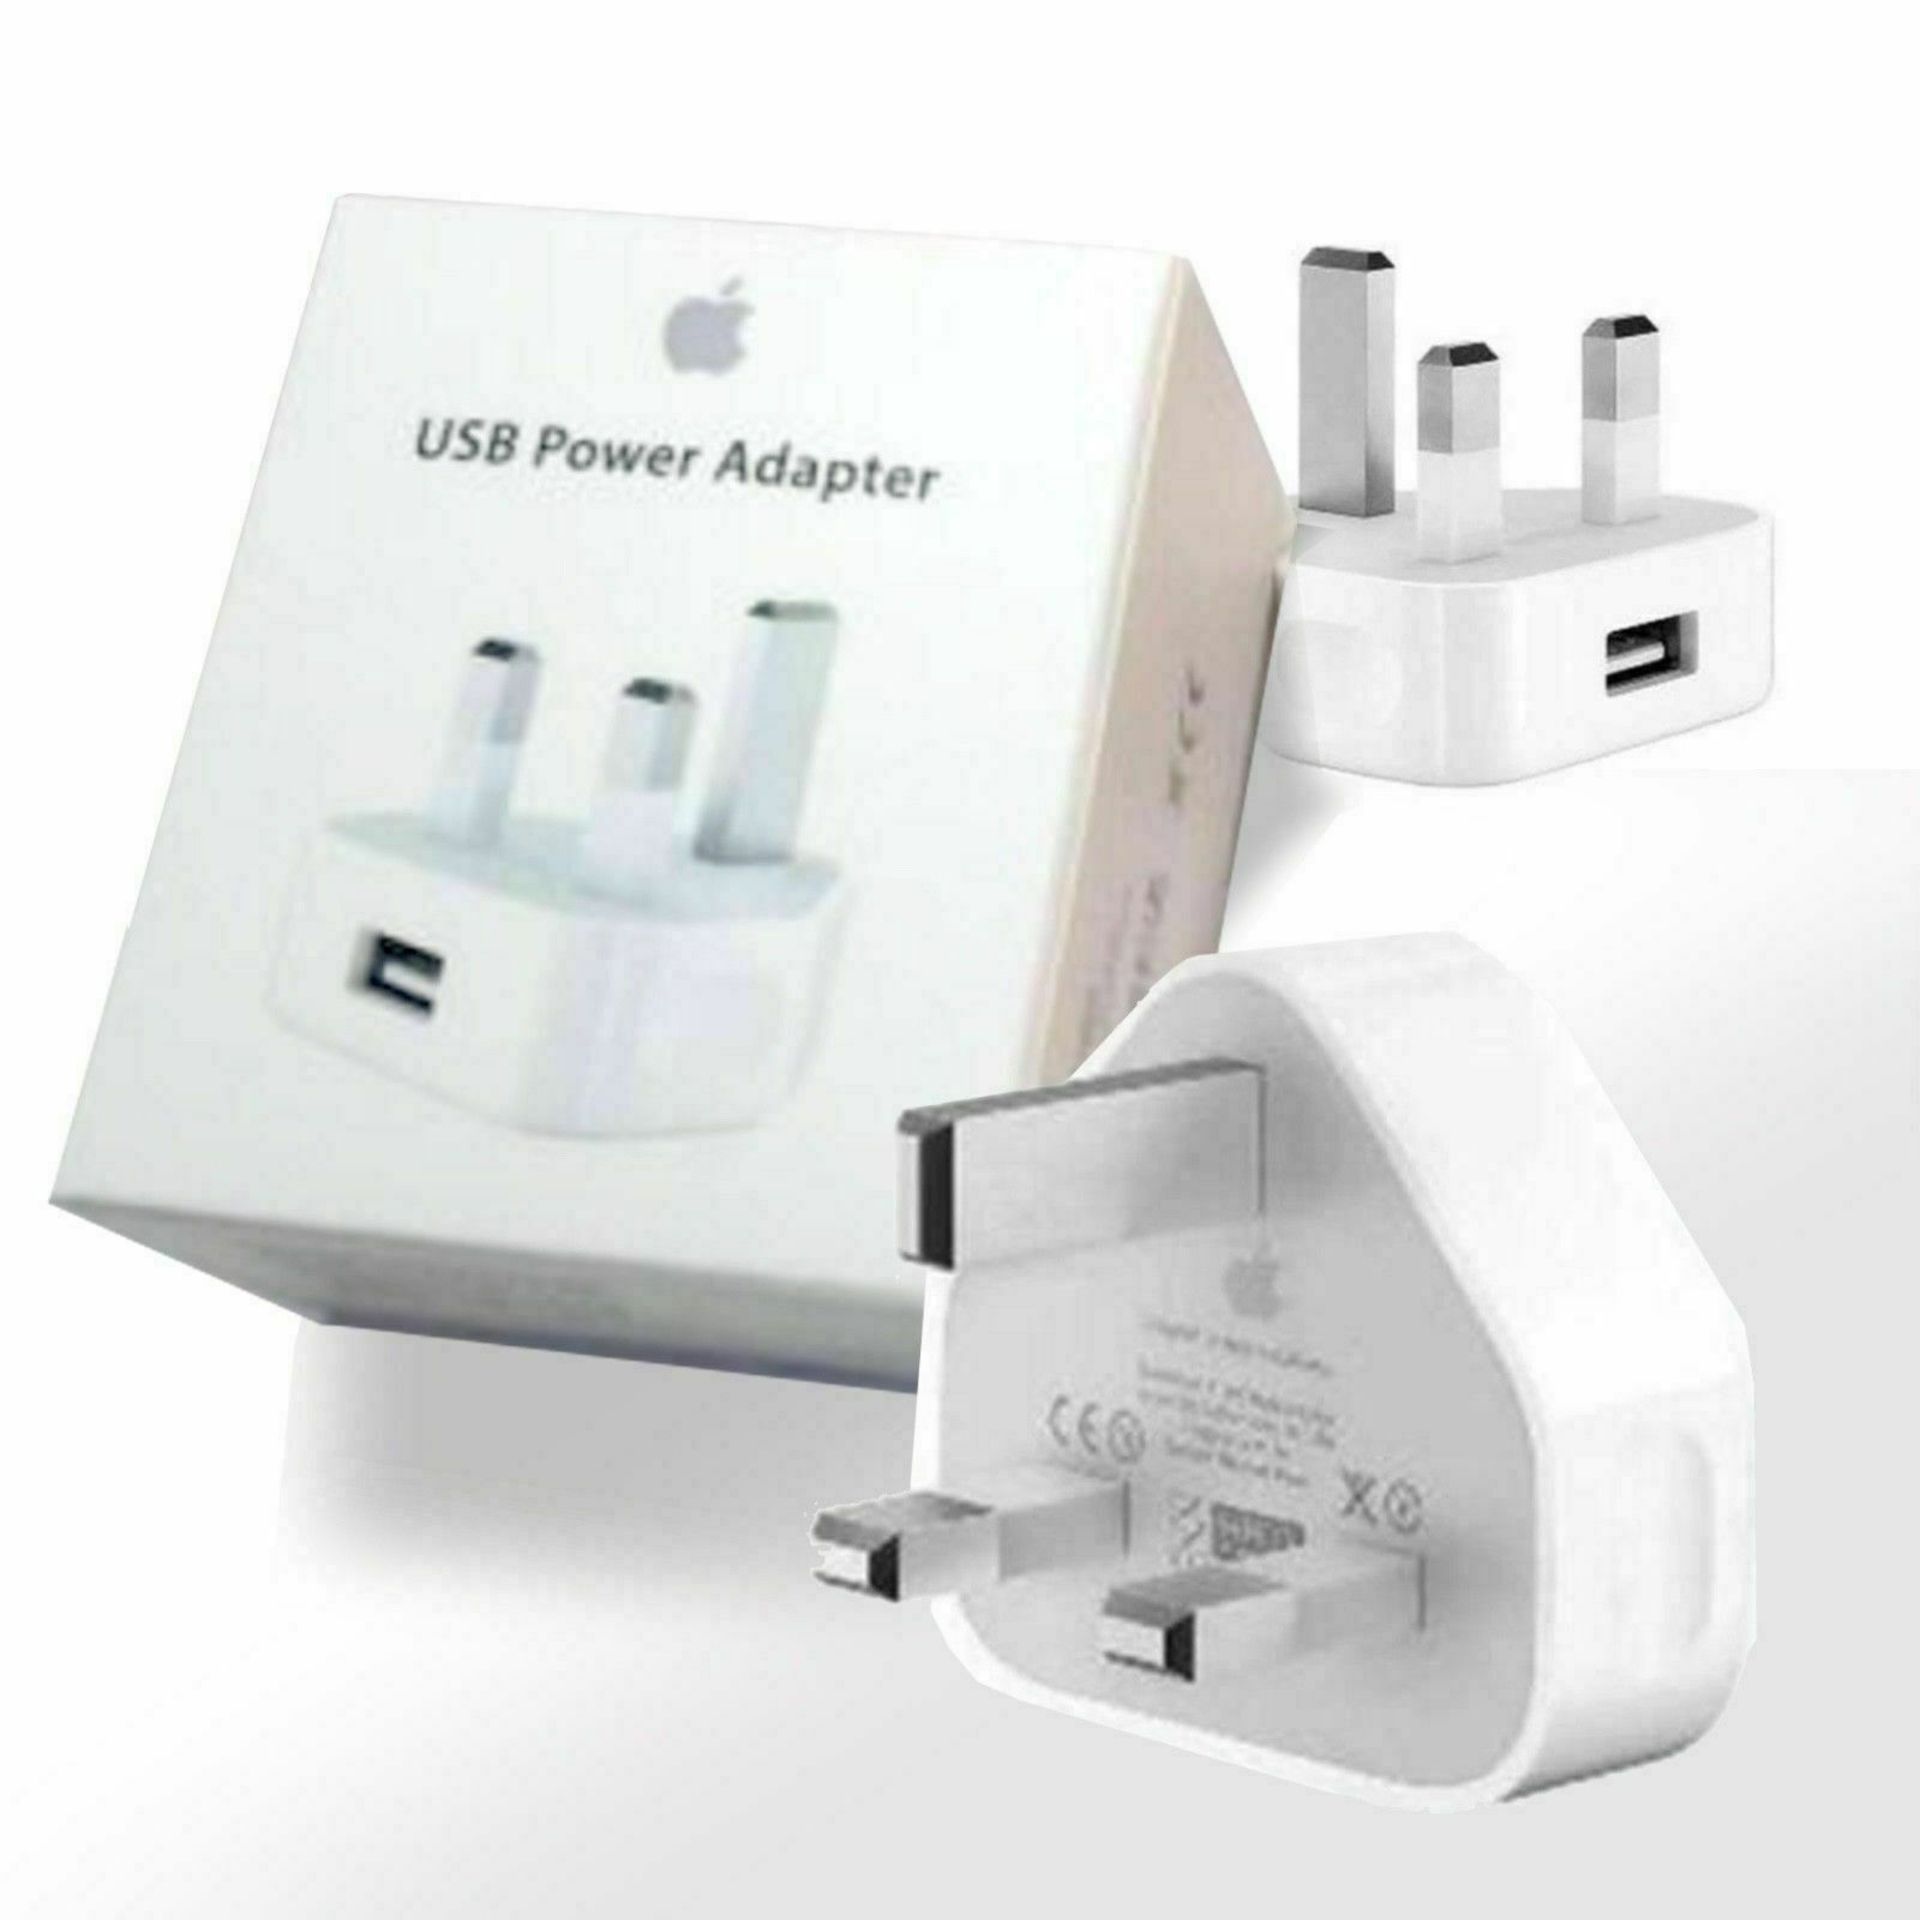 3 X Apple Md812B/C 5W Usb Power Adapter For Iphone/Ipod - White